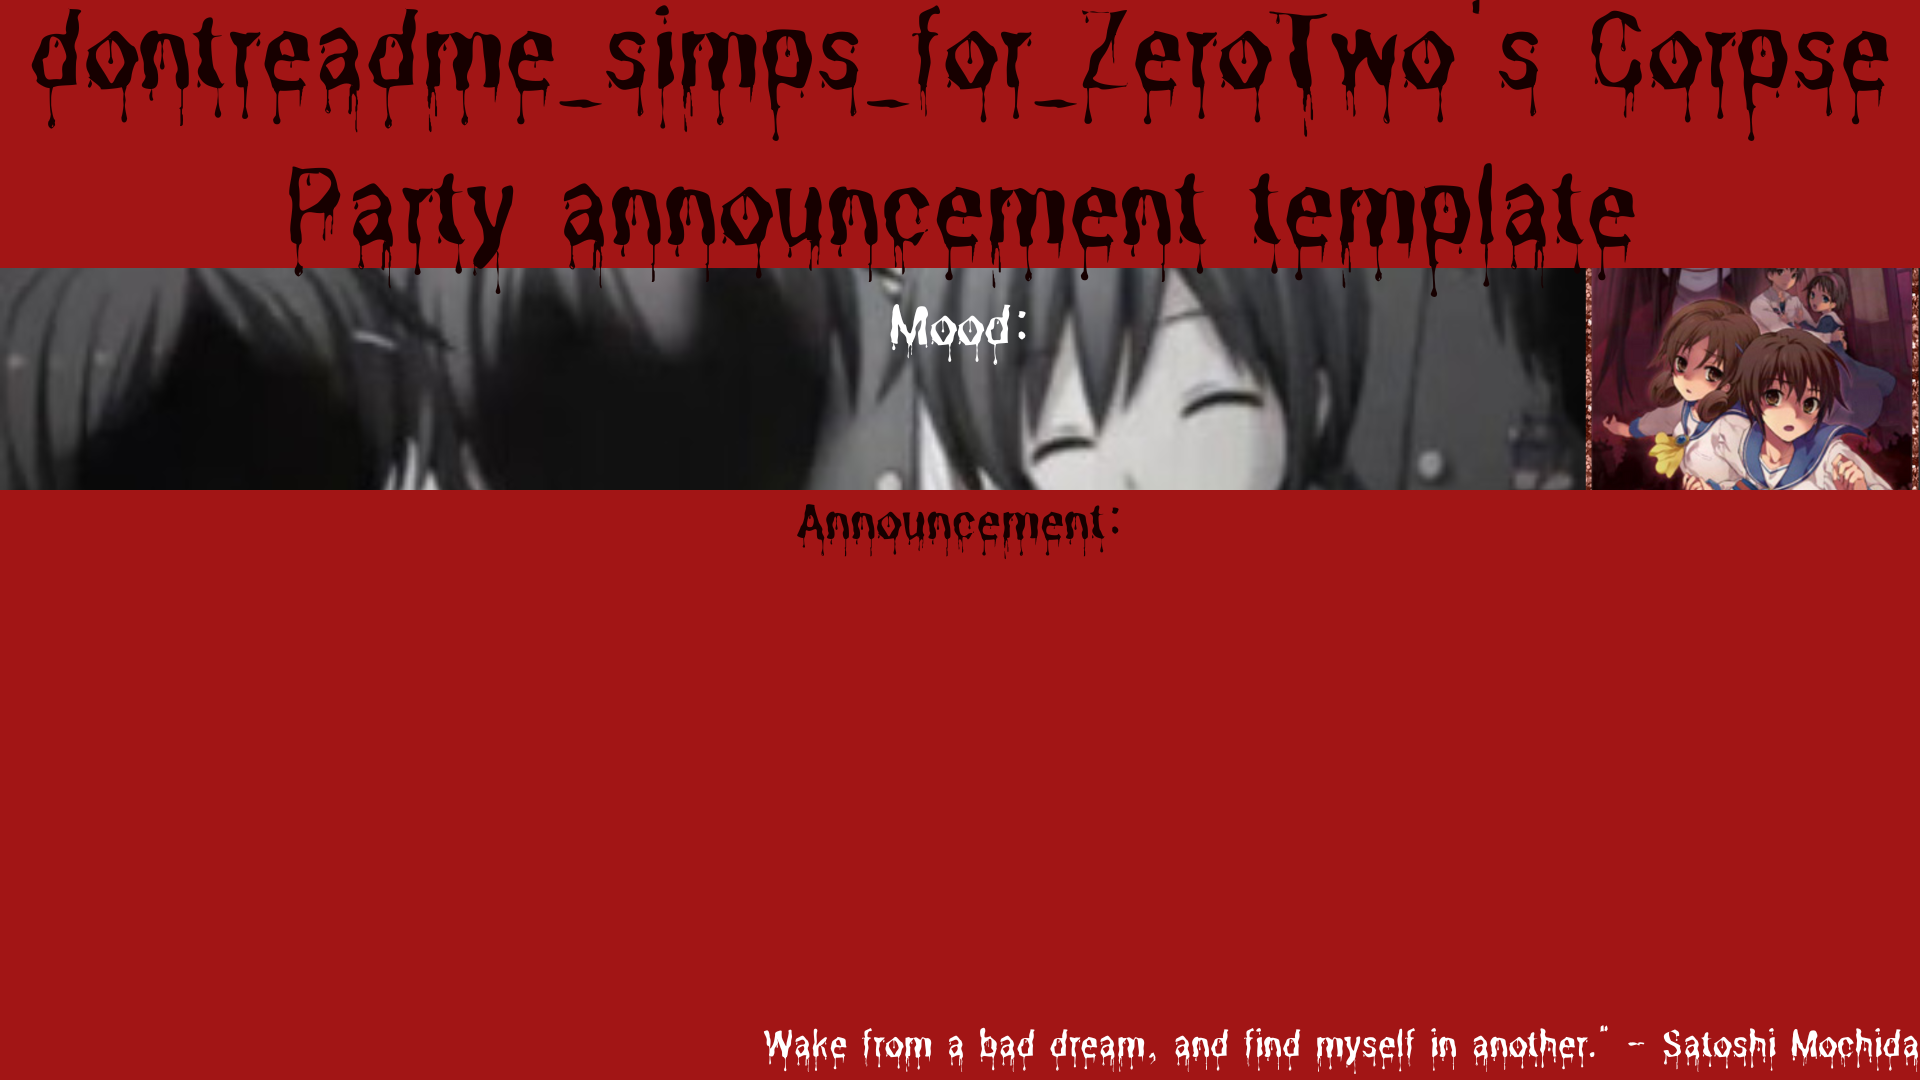 drm's corpse party template announcement Blank Meme Template